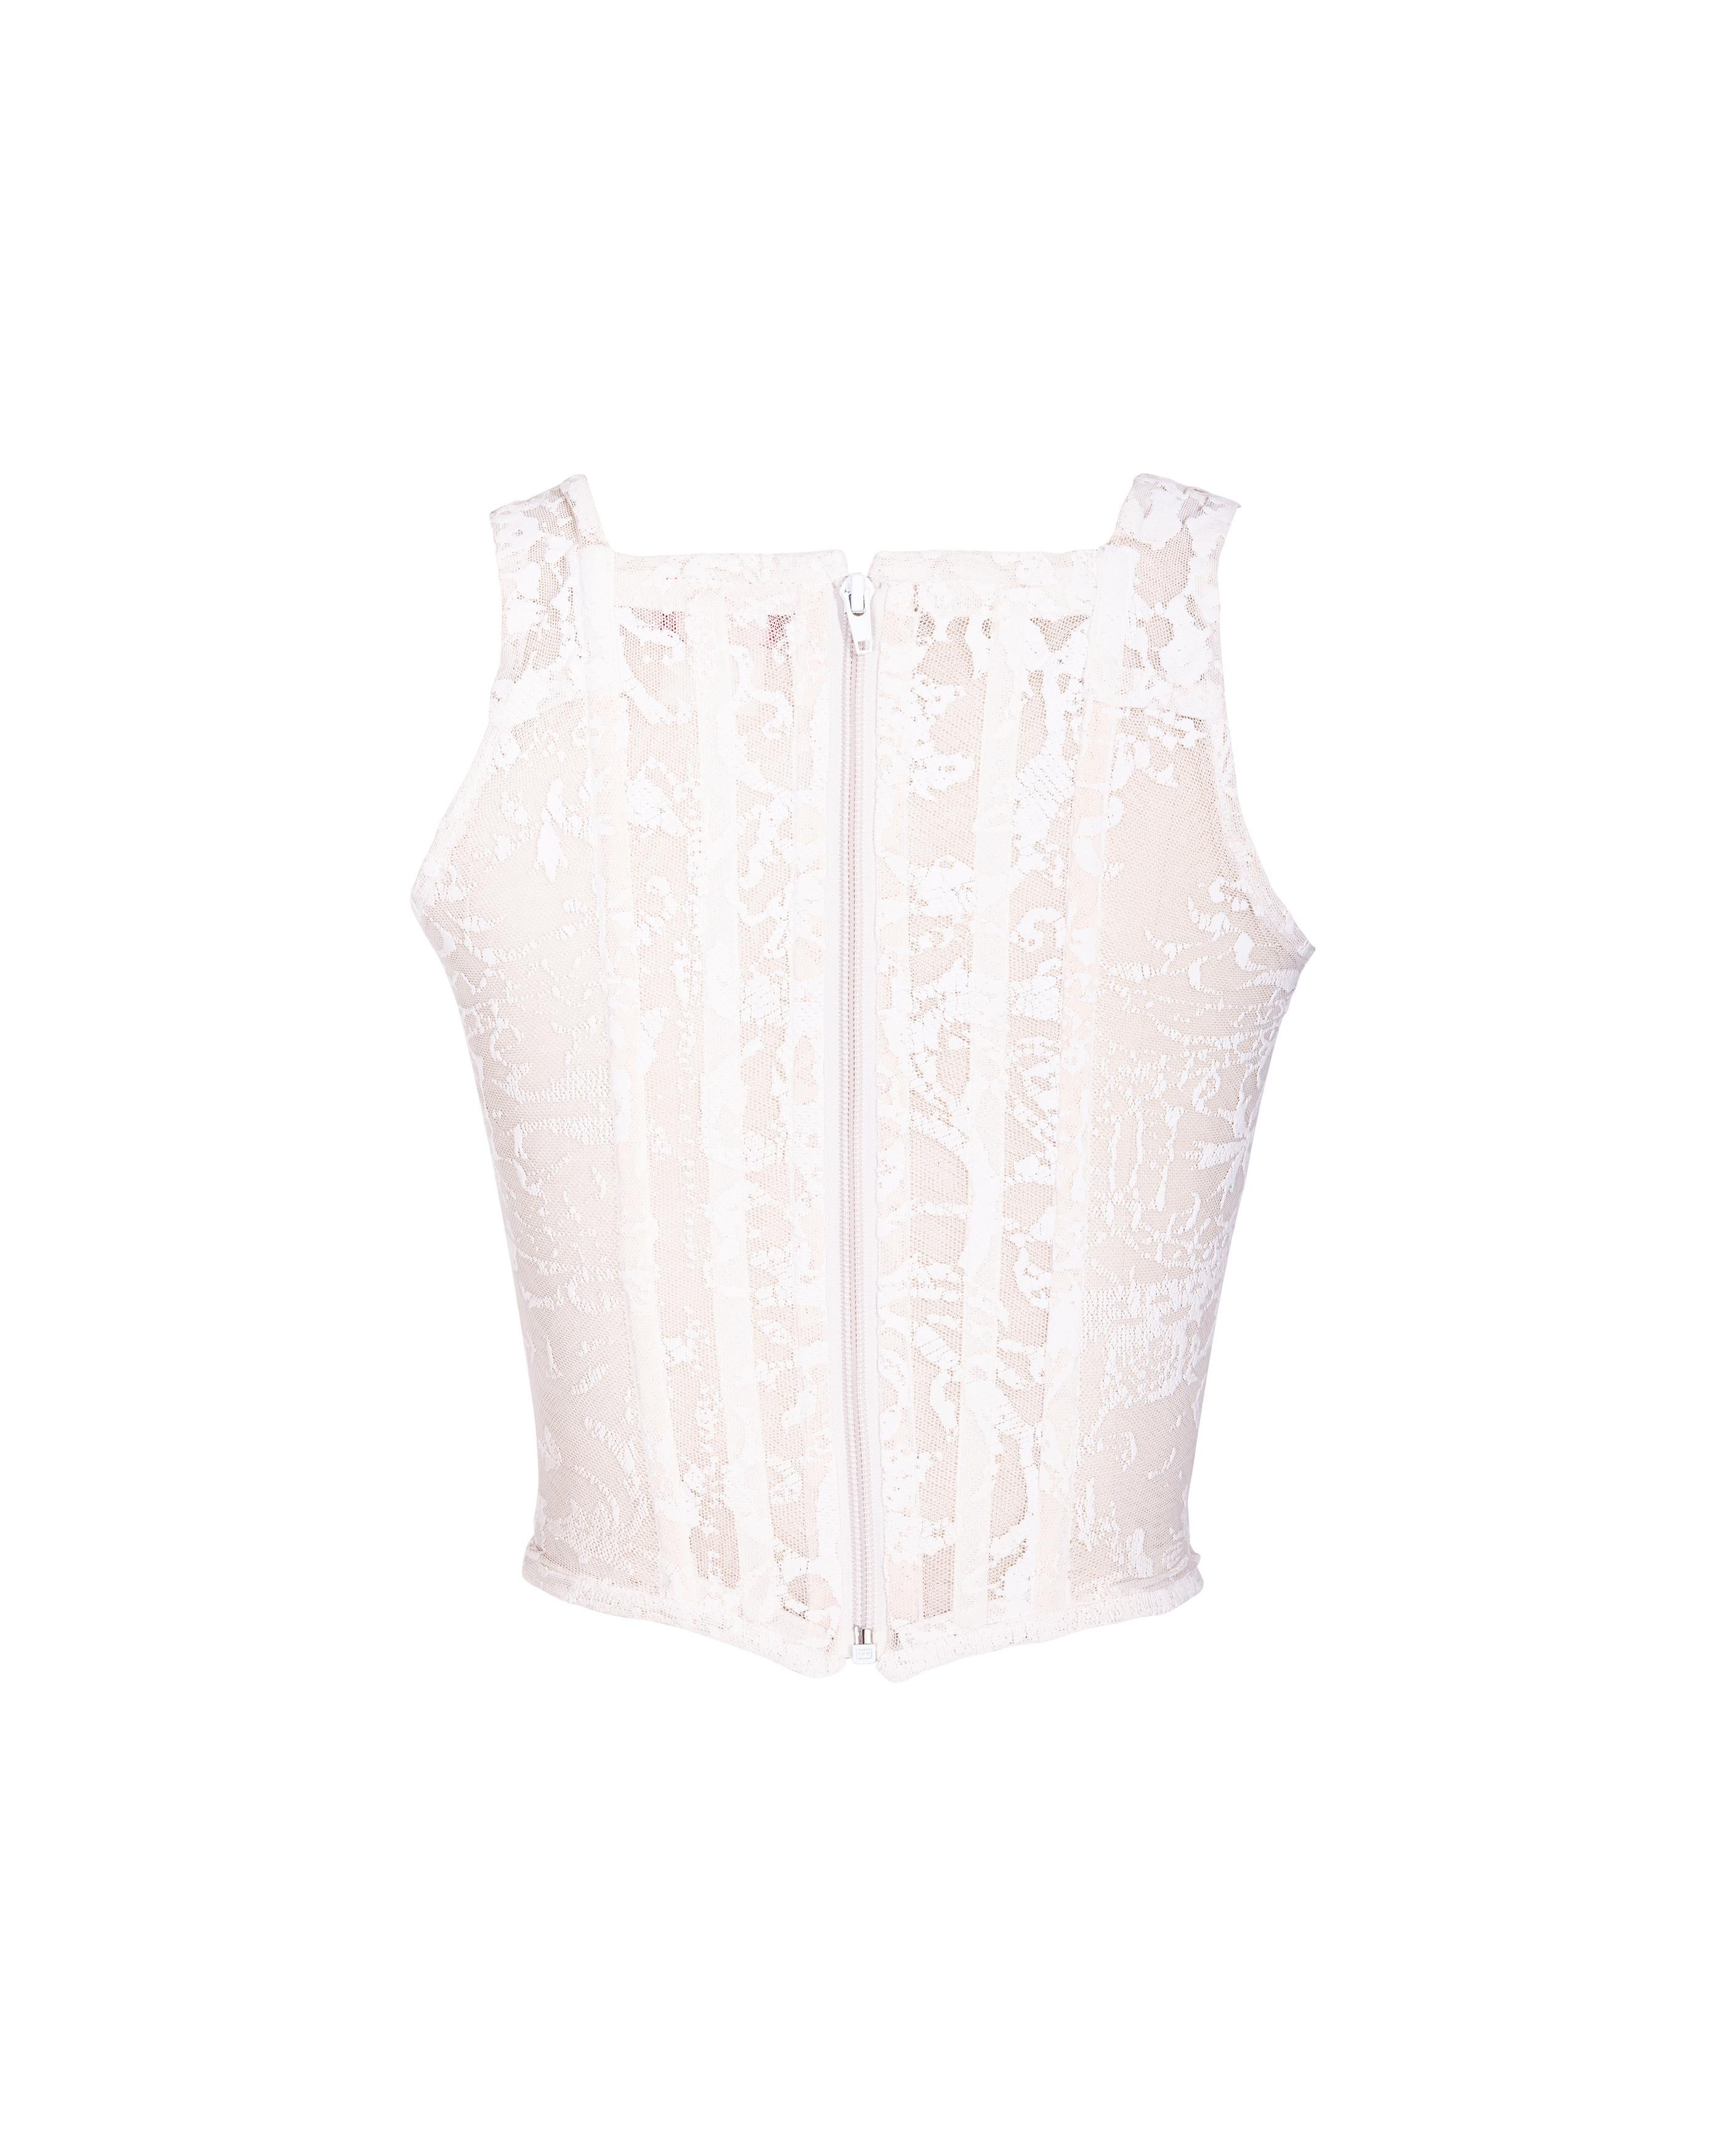 A/W 1992 Vivienne Westwood Ecru Lace Corset In Good Condition In North Hollywood, CA